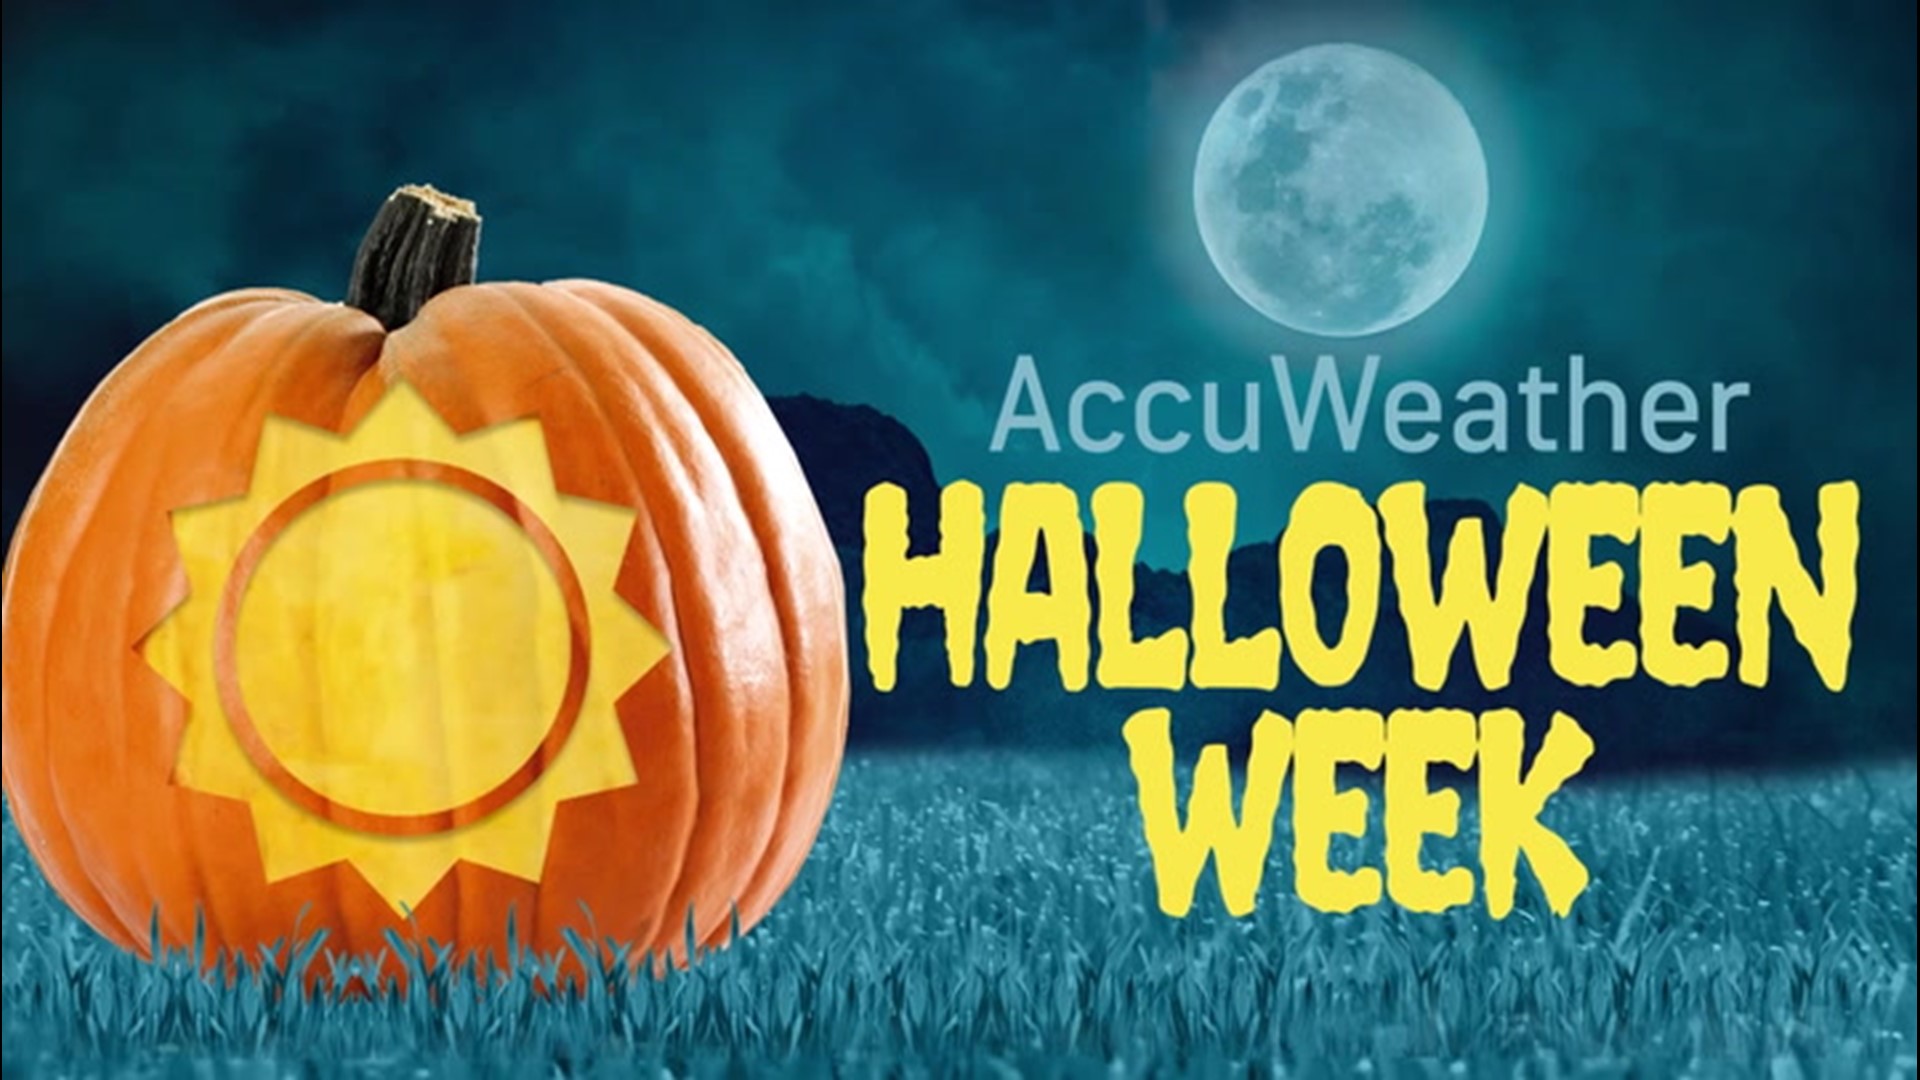 You can expect some differences for Halloween this year due to the ongoing Covid-19 pandemic. The American Red Cross has updated its annual Halloween Safety Tips, as well as some alternative ways to have holiday fun this year.